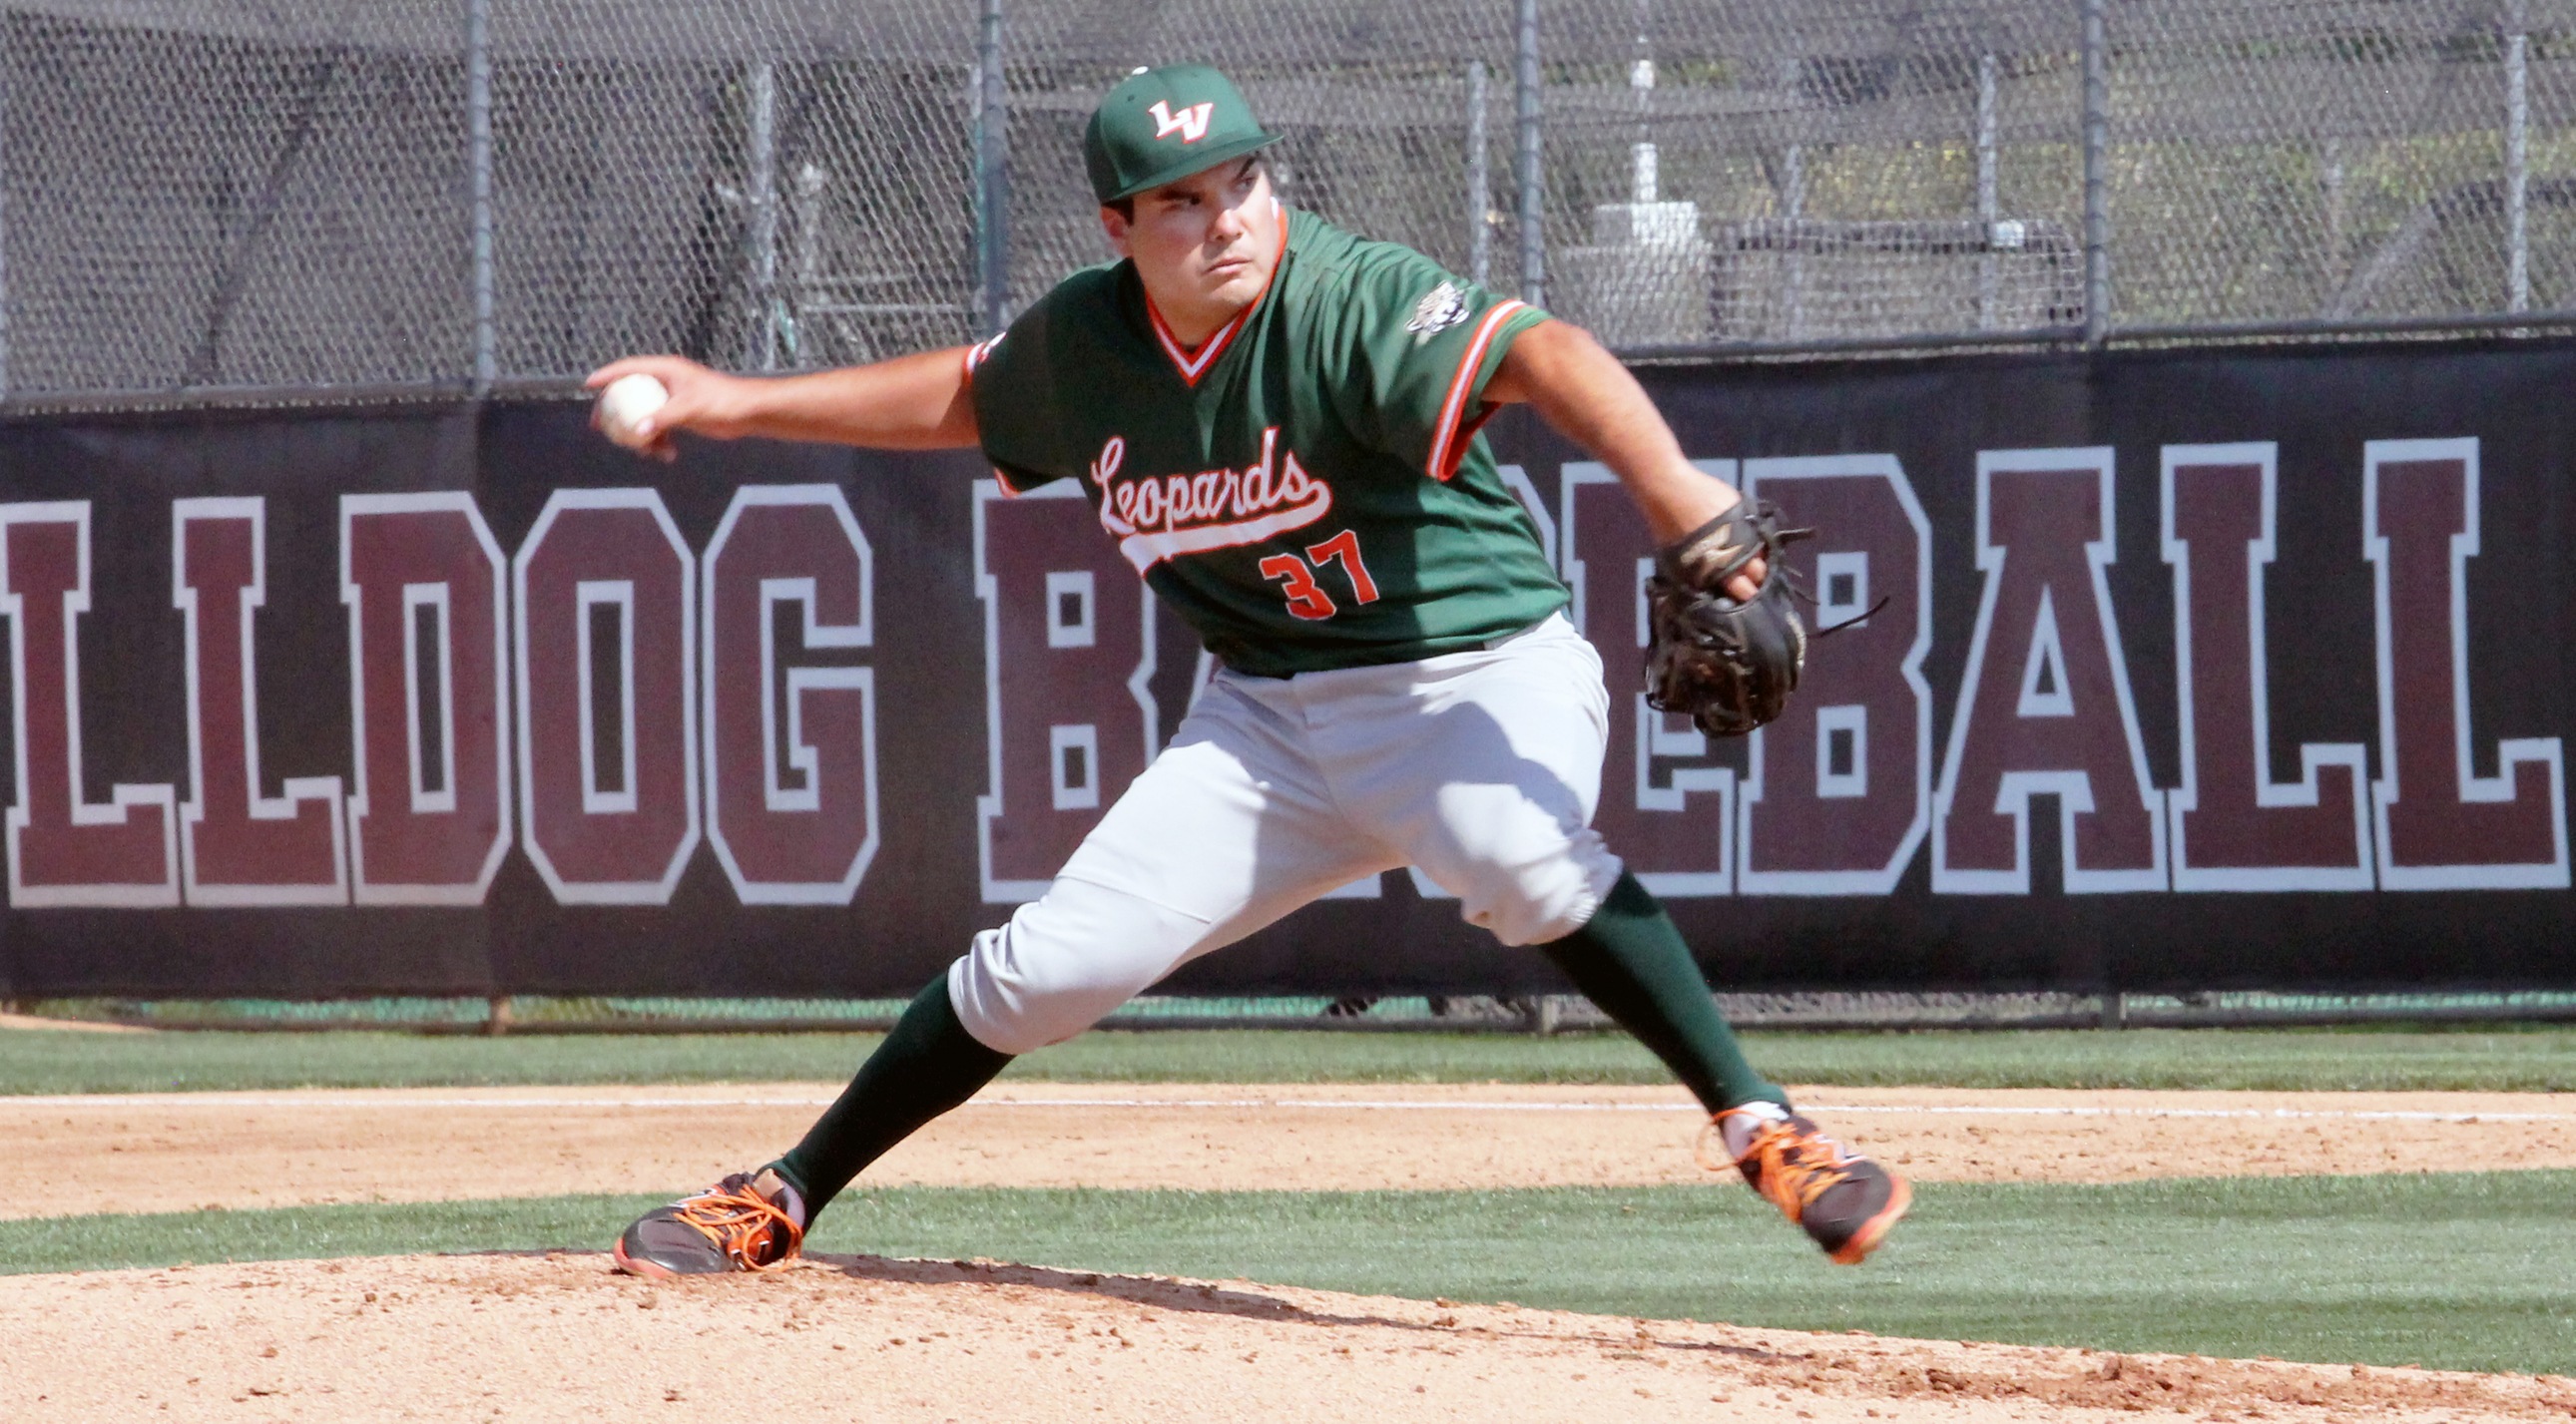 Sean Holt led the Leopards on the mound to an 8-2 win over Redlands